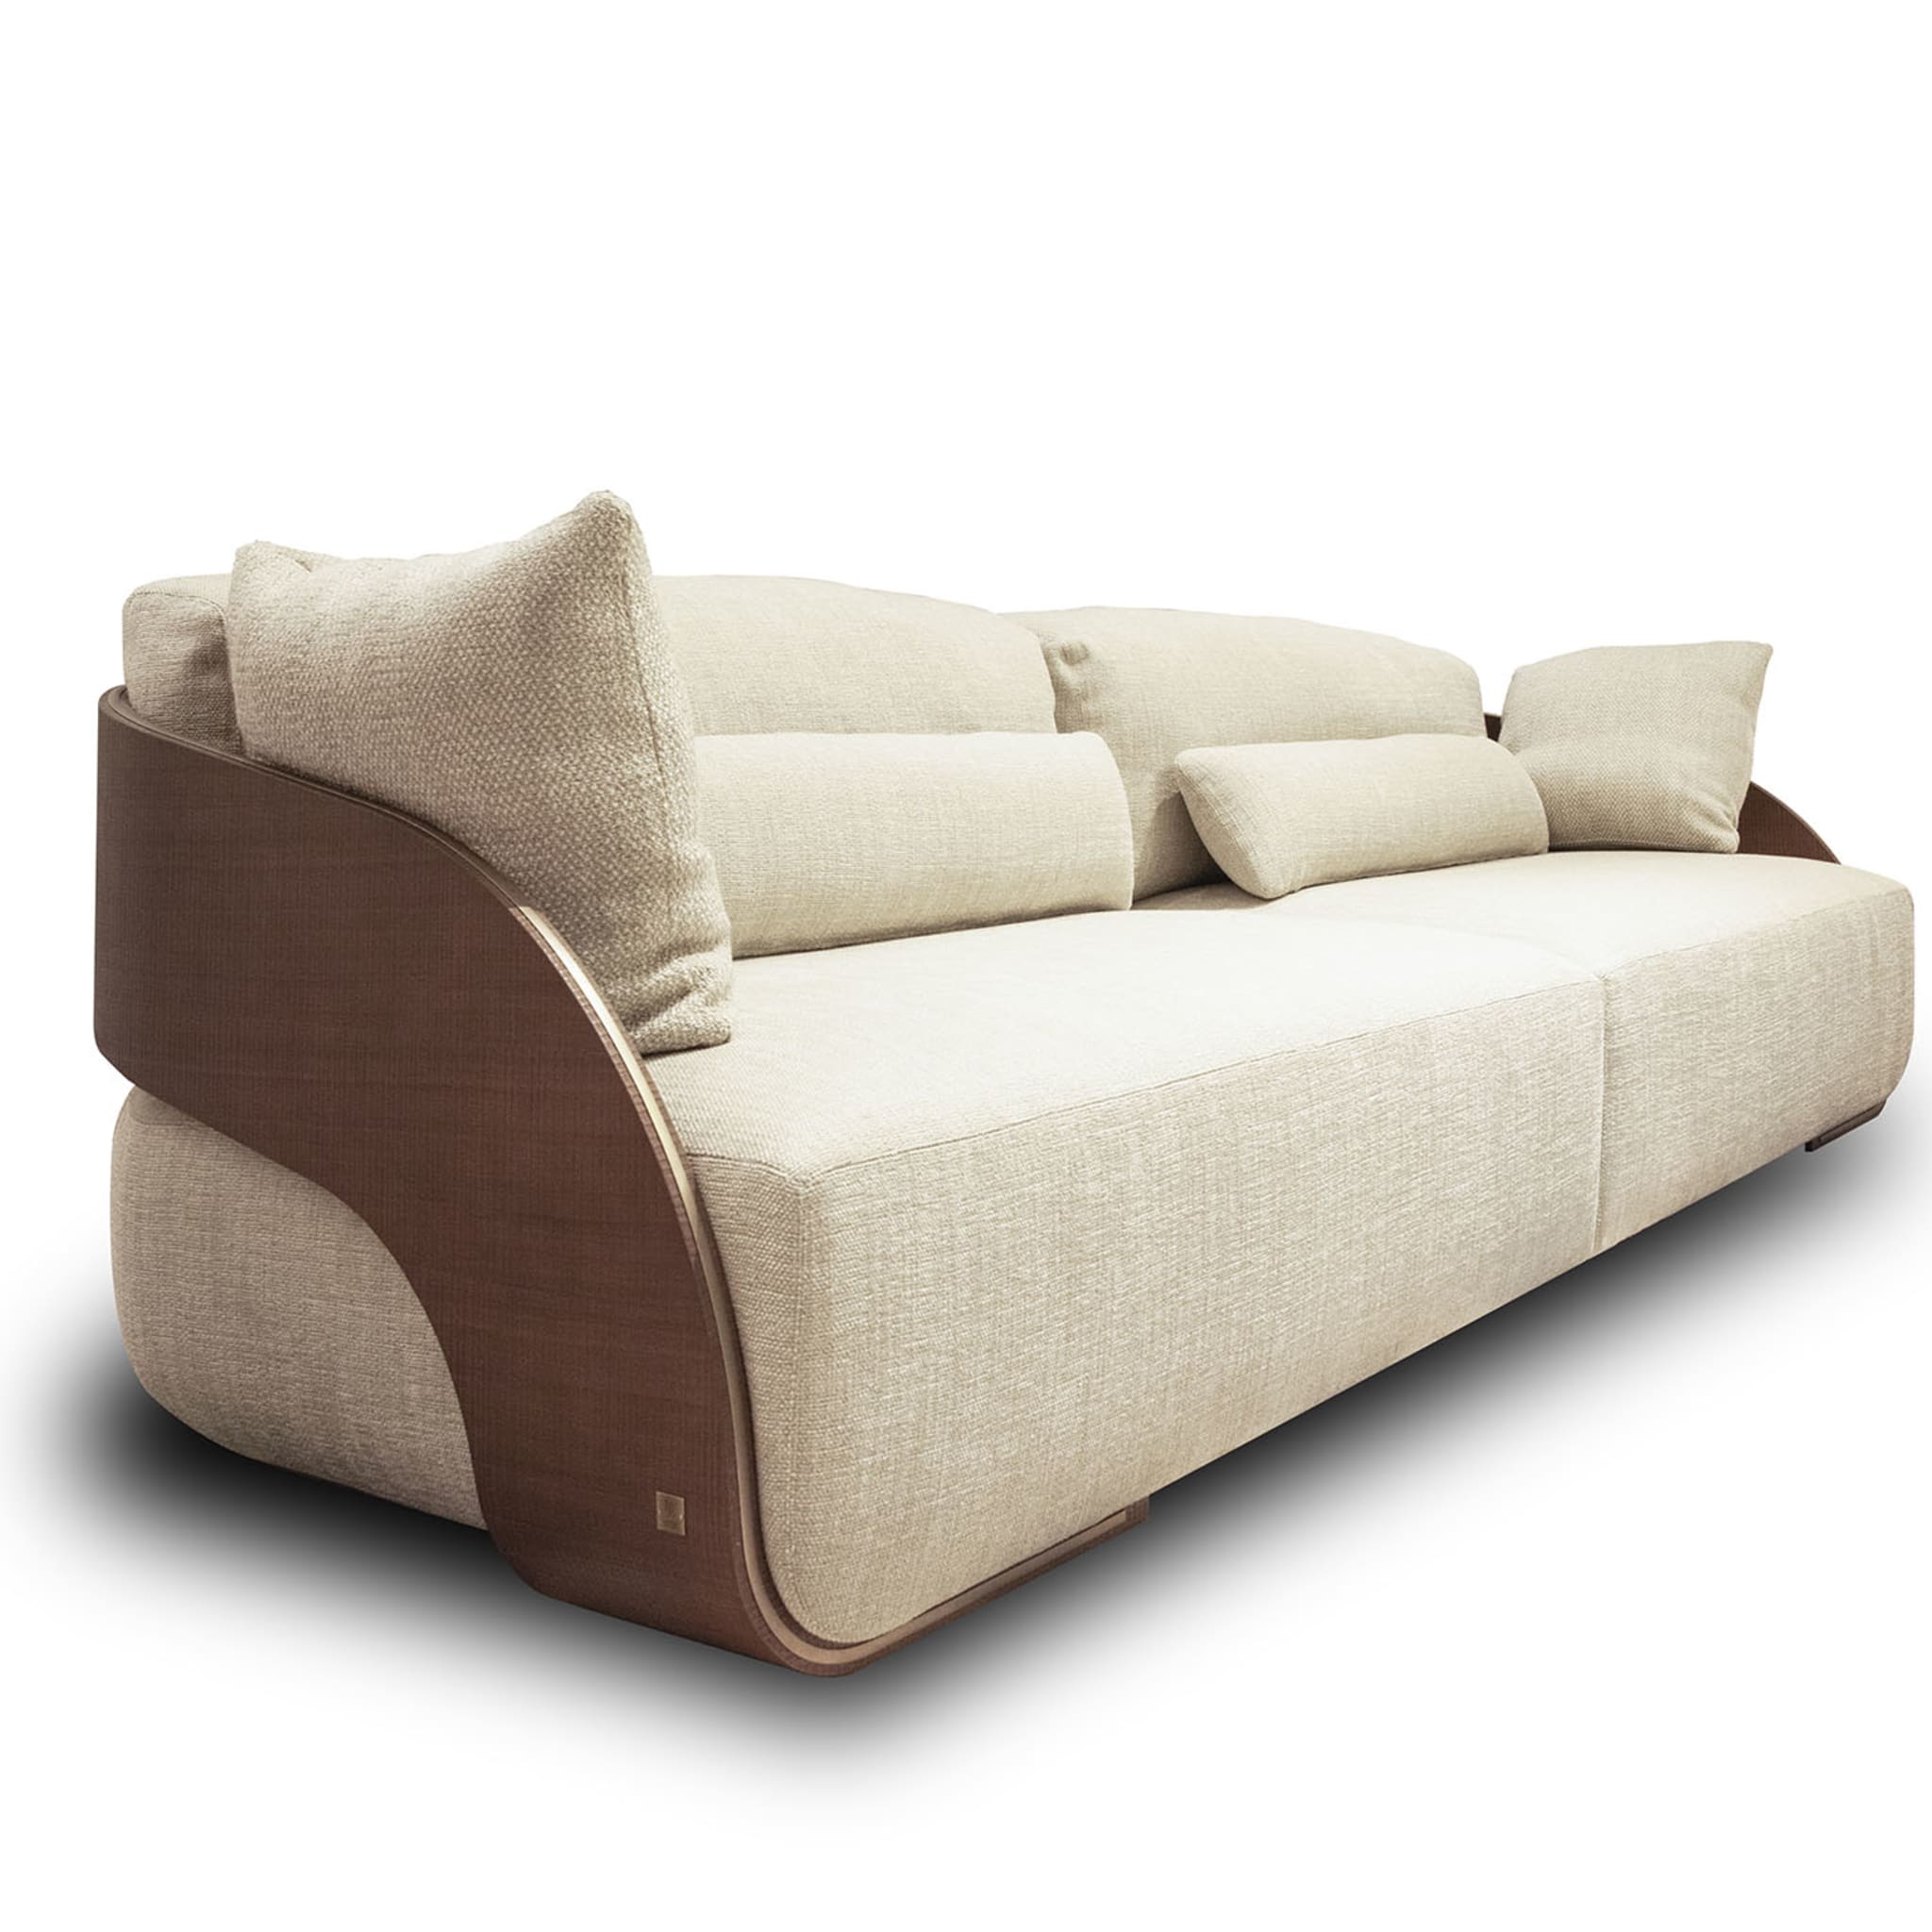 LeLude Collection Sofa - Alternative view 1